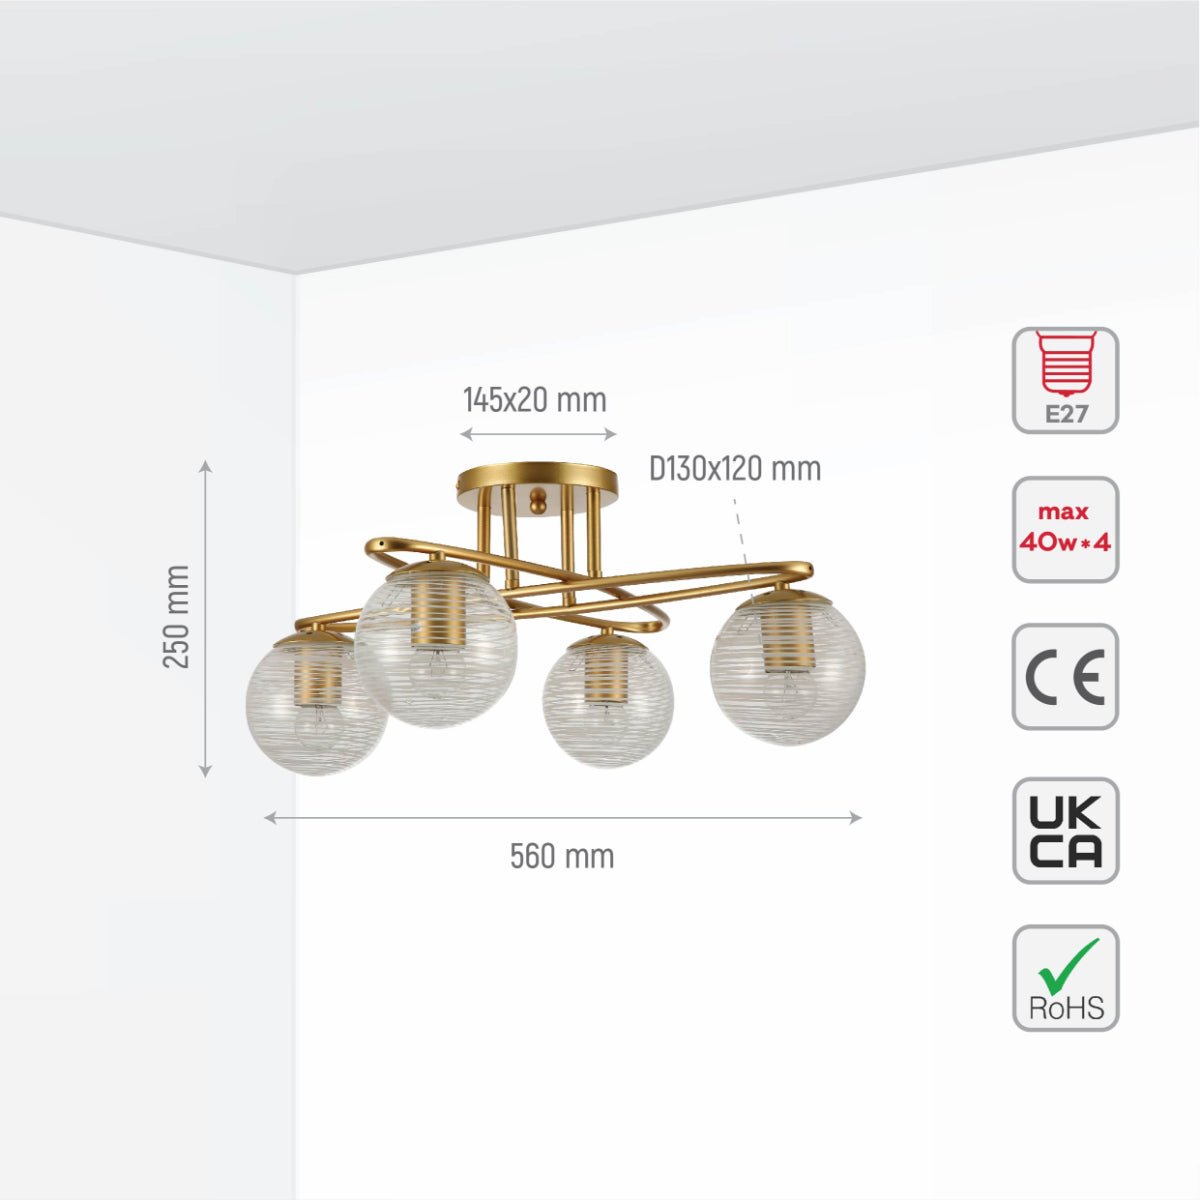 Size and specs of Gold Ellipse Metal Textured Globe Glass Modern Ceiling Light with E27 Fittings | TEKLED 159-17672